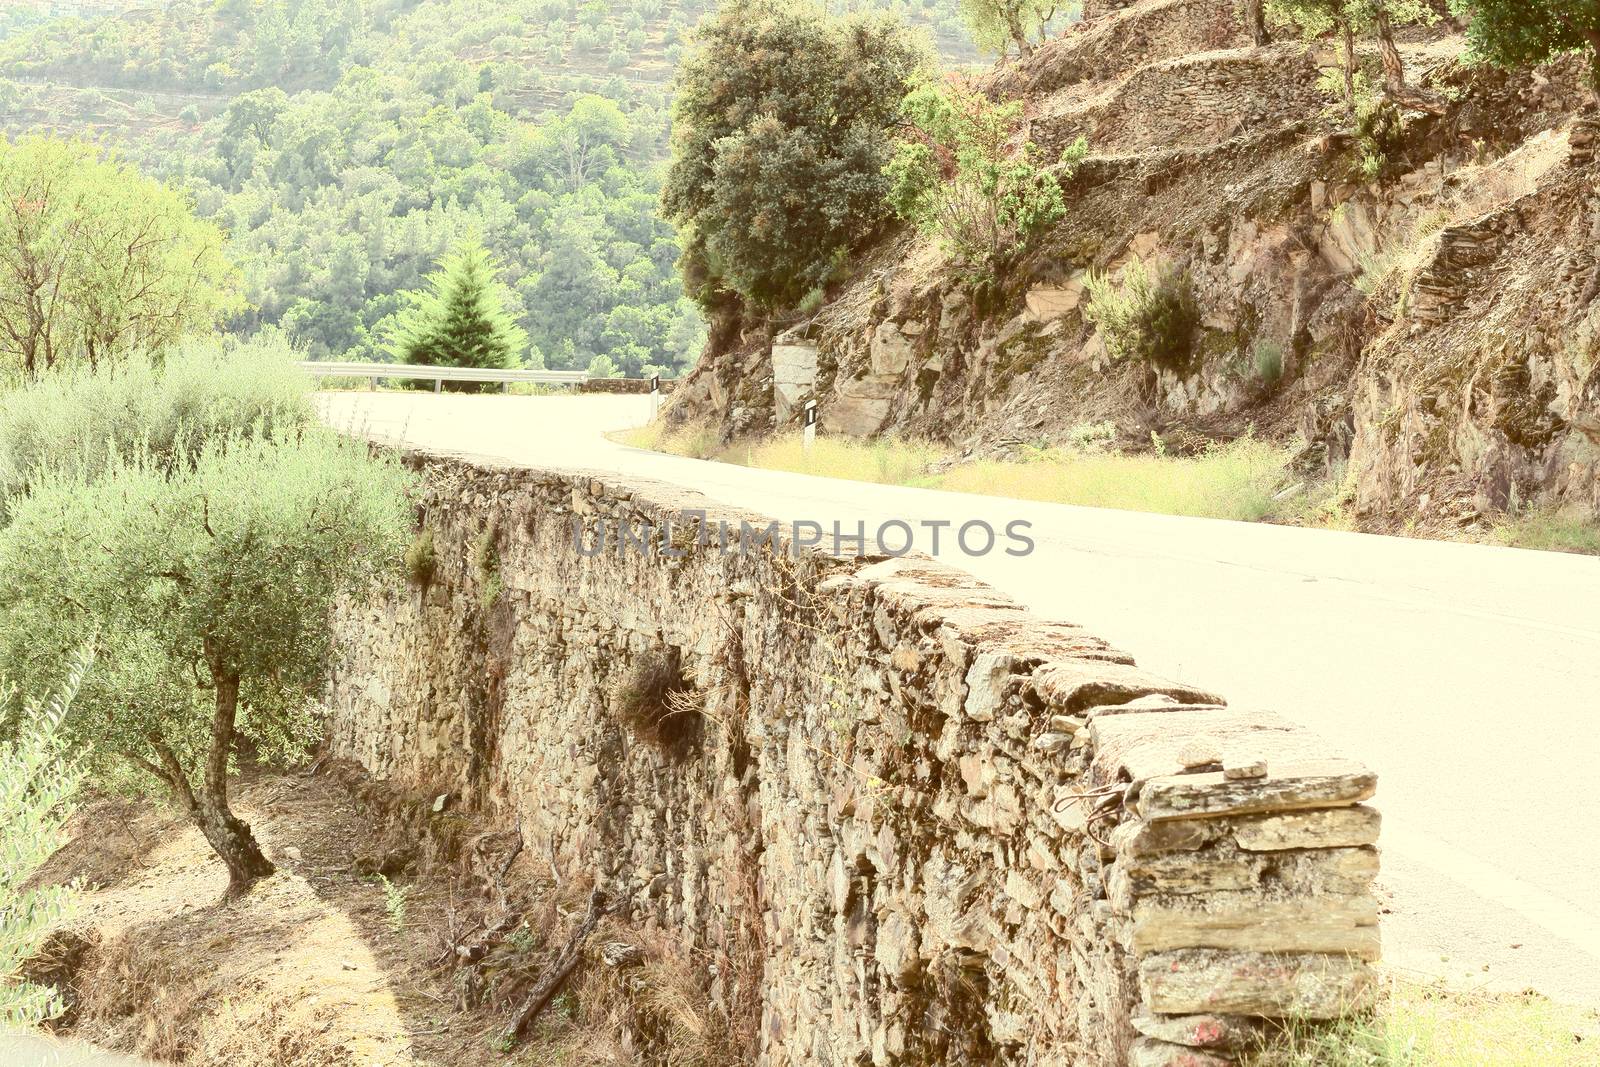 Retaining Wall for Mountain Asphalt Road in Portugal, Retro Image Filtered Style